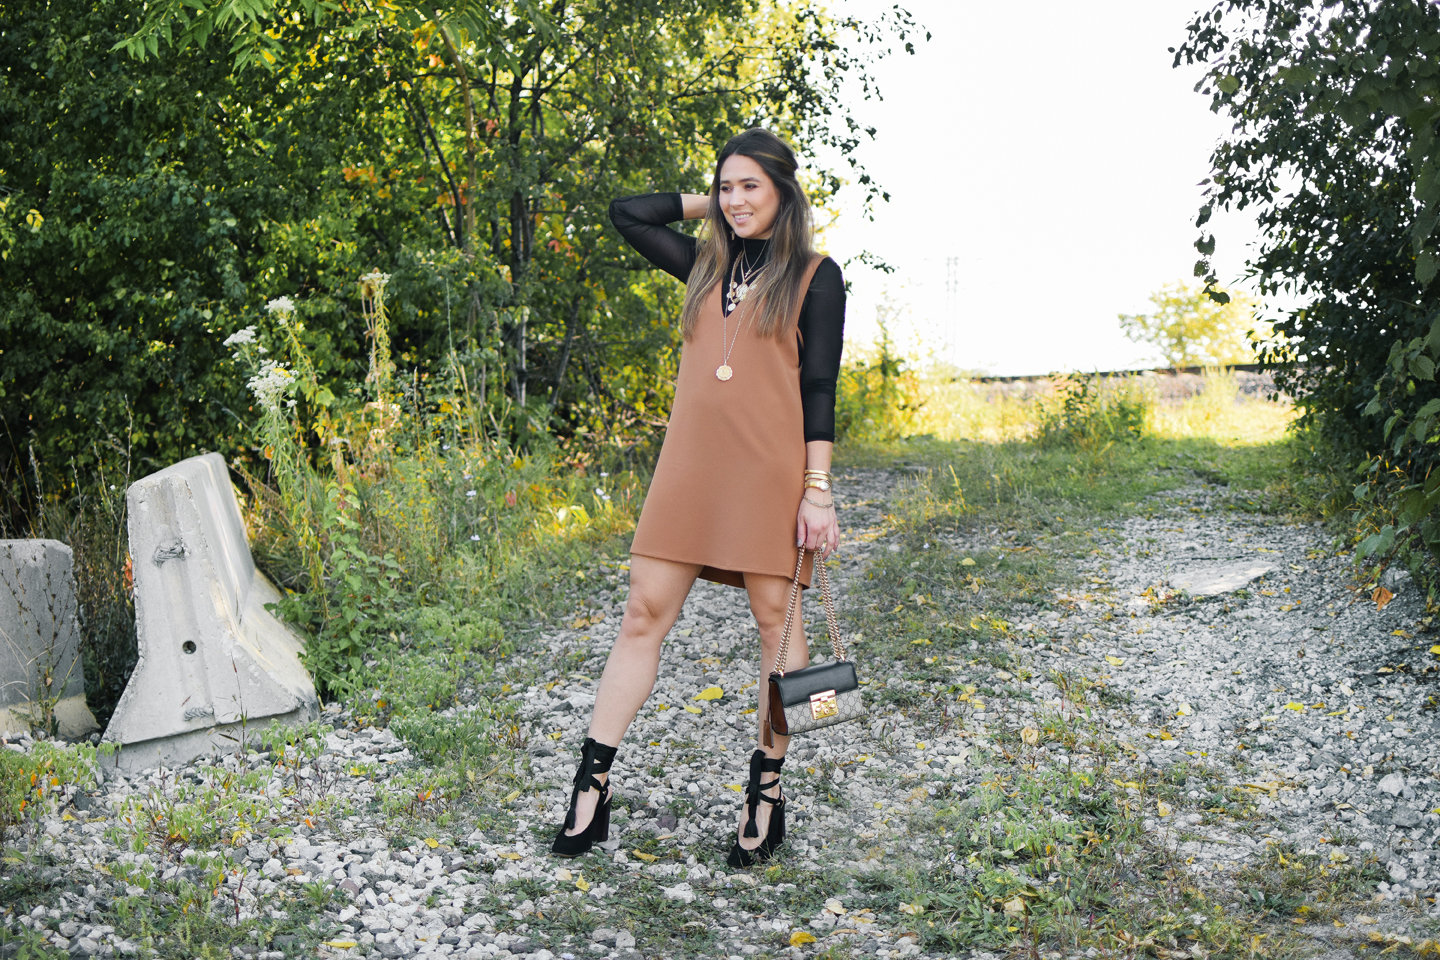 tobi-camel-shift-dress-fall-outfit-cute-style-sexy-professional-chloe-lace-up-heels